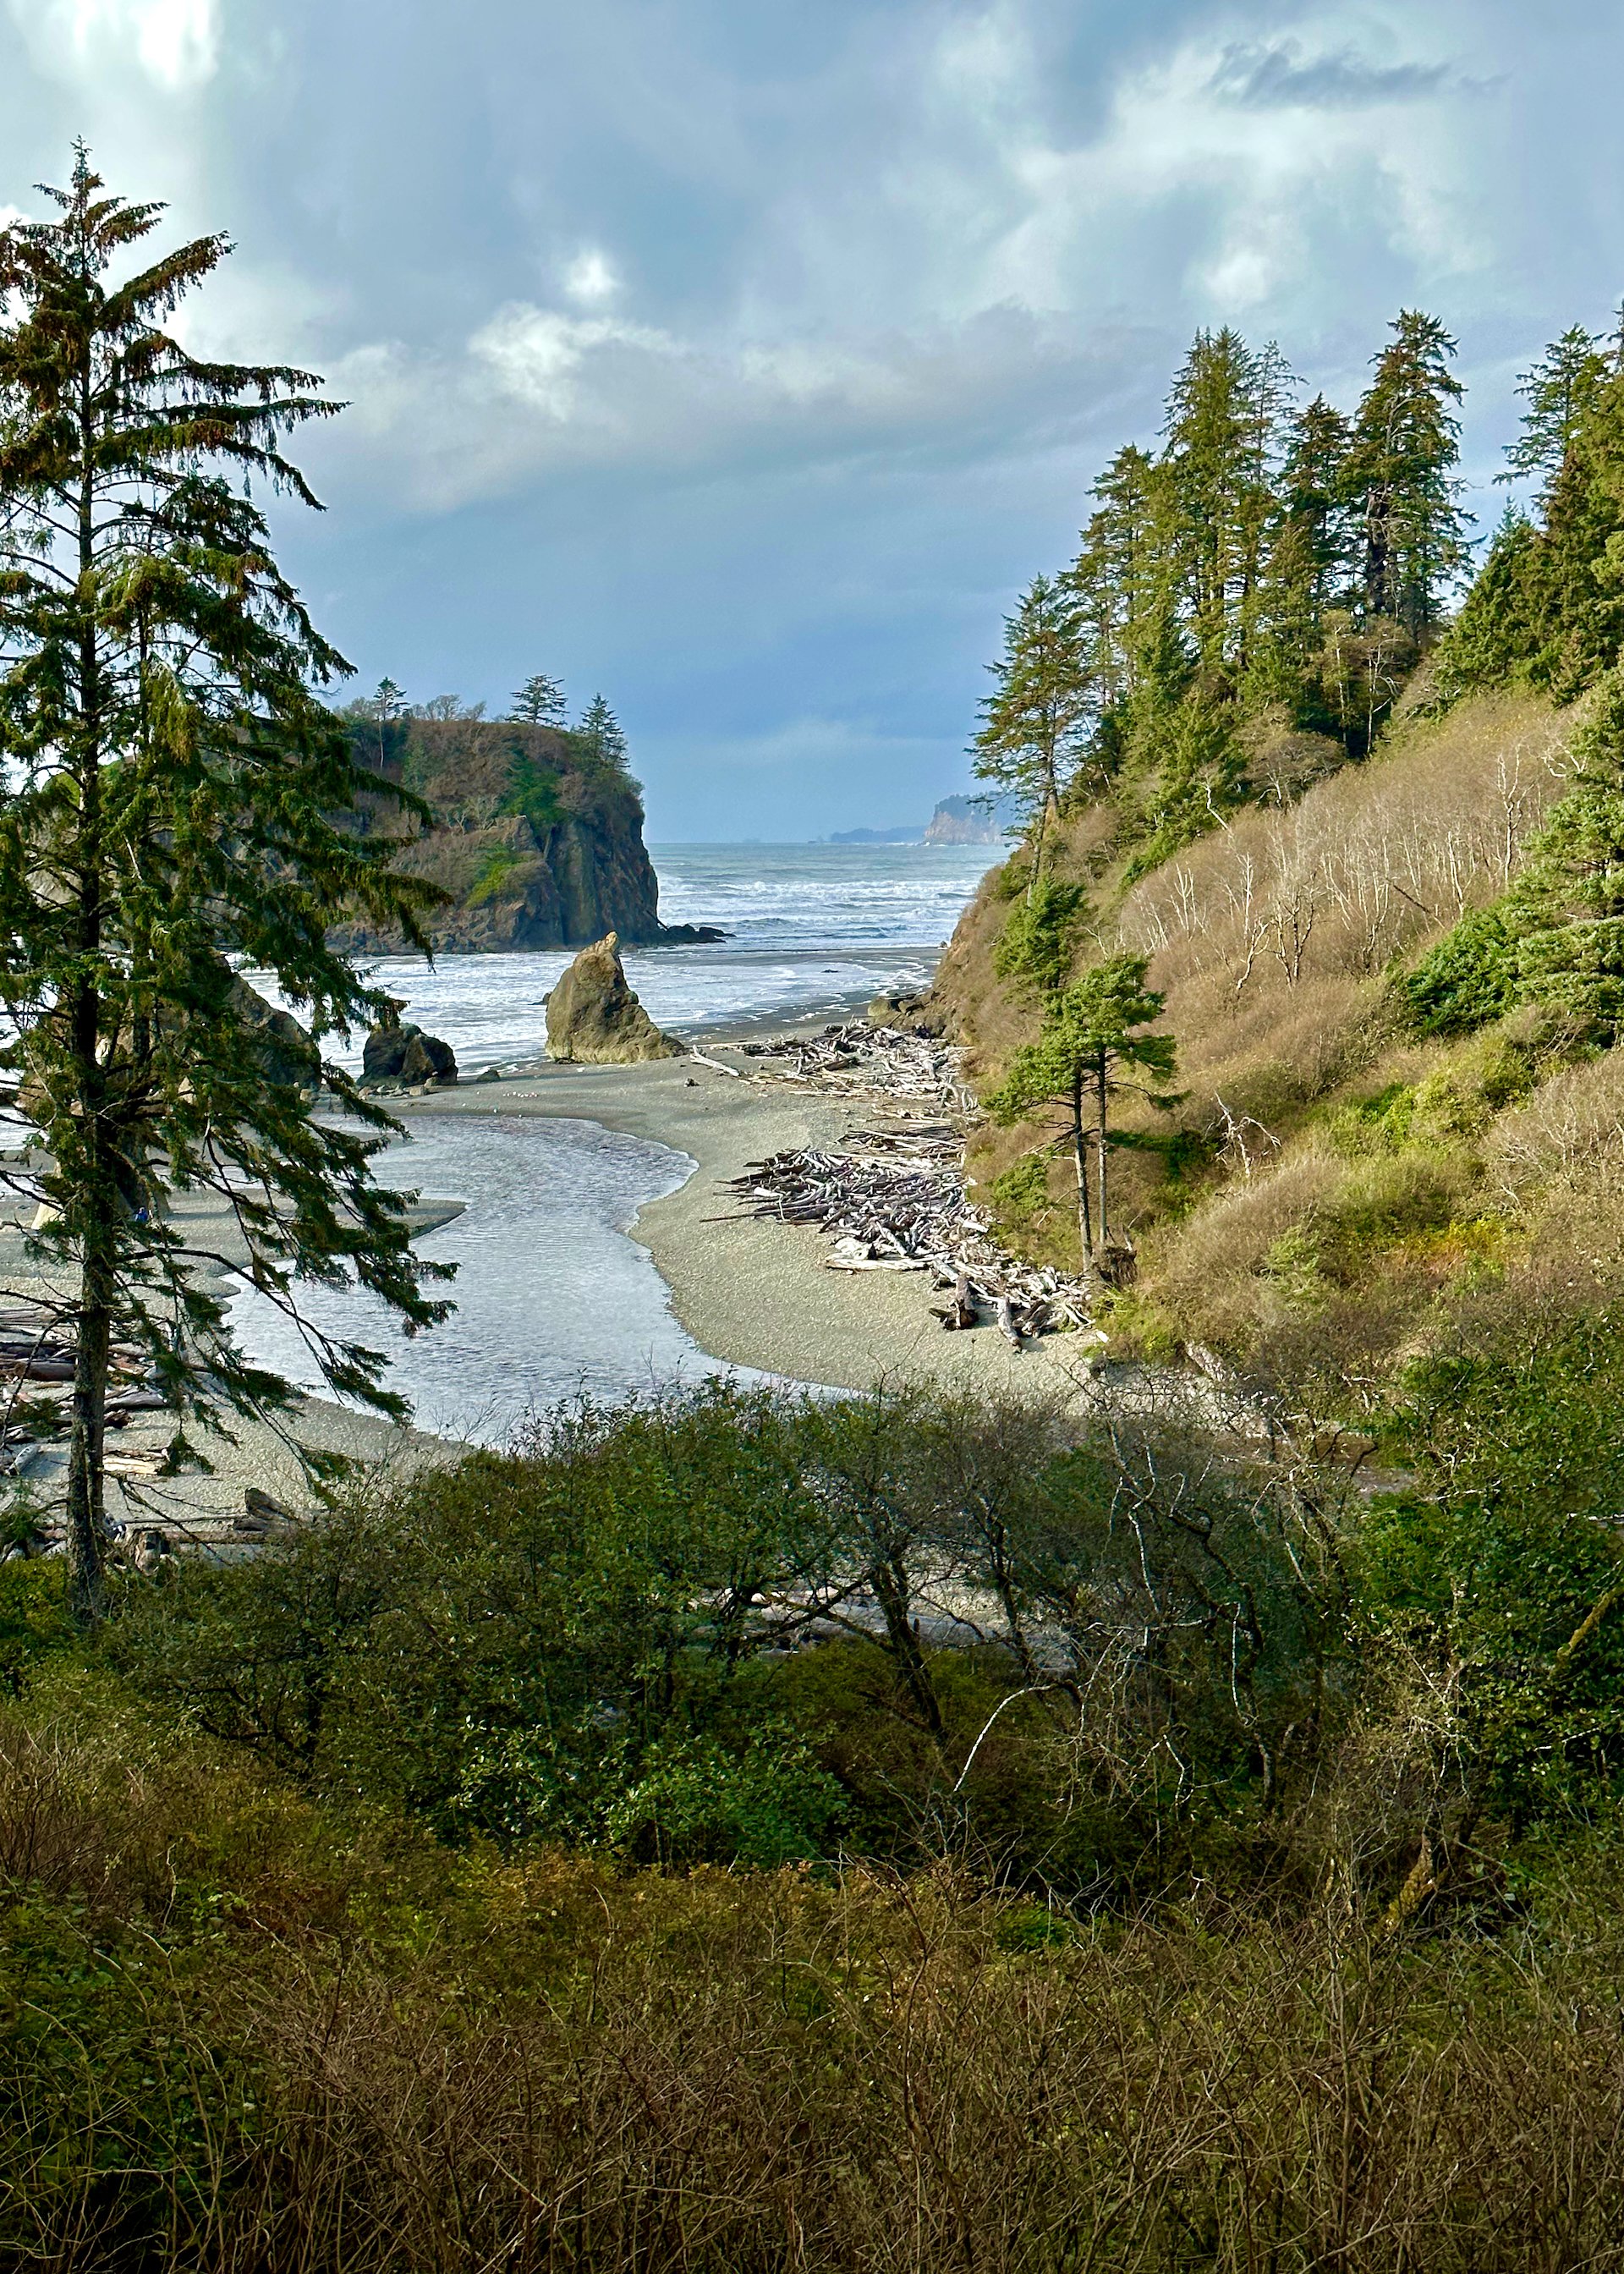  Looking down at Ruby Beach from the lookout. 